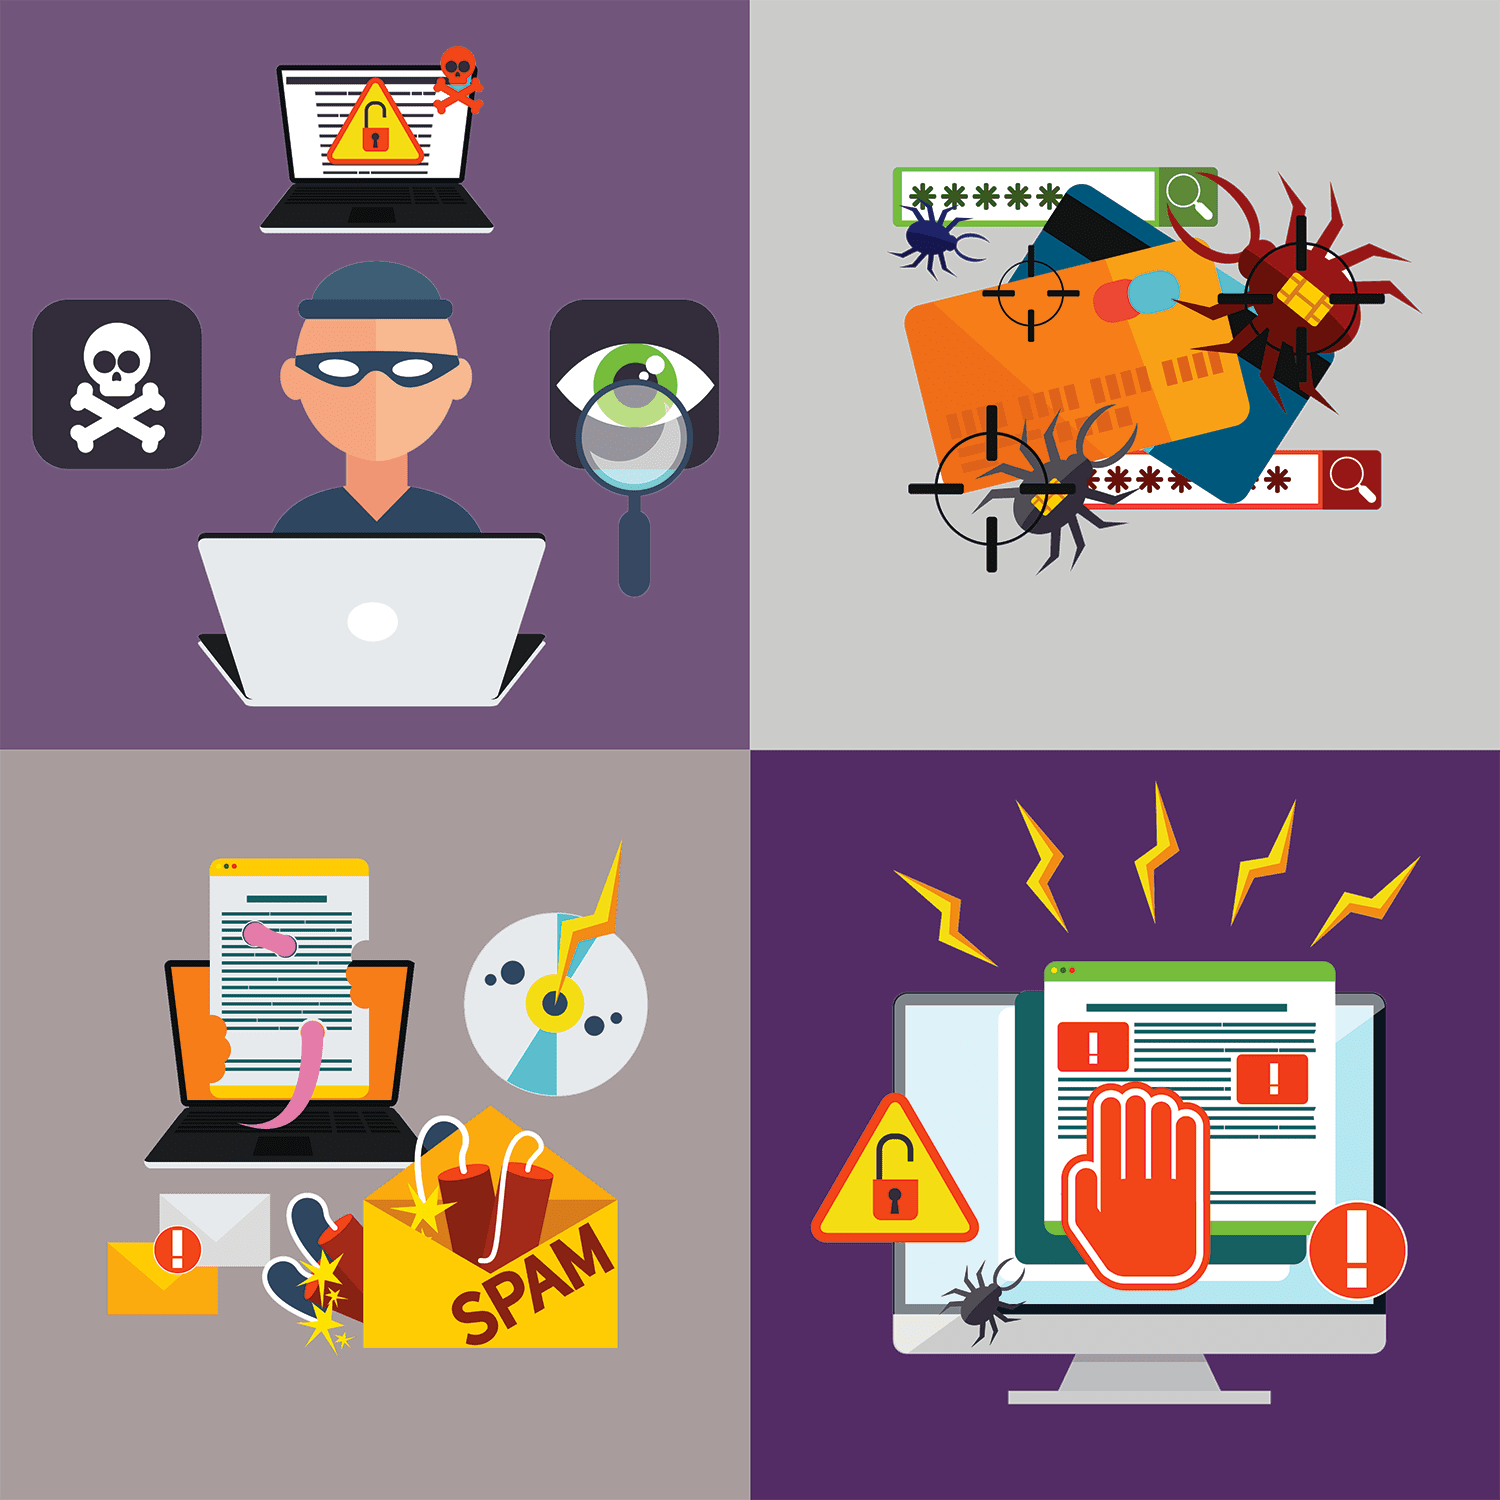 Most Common Threats on E-Commerce Sites